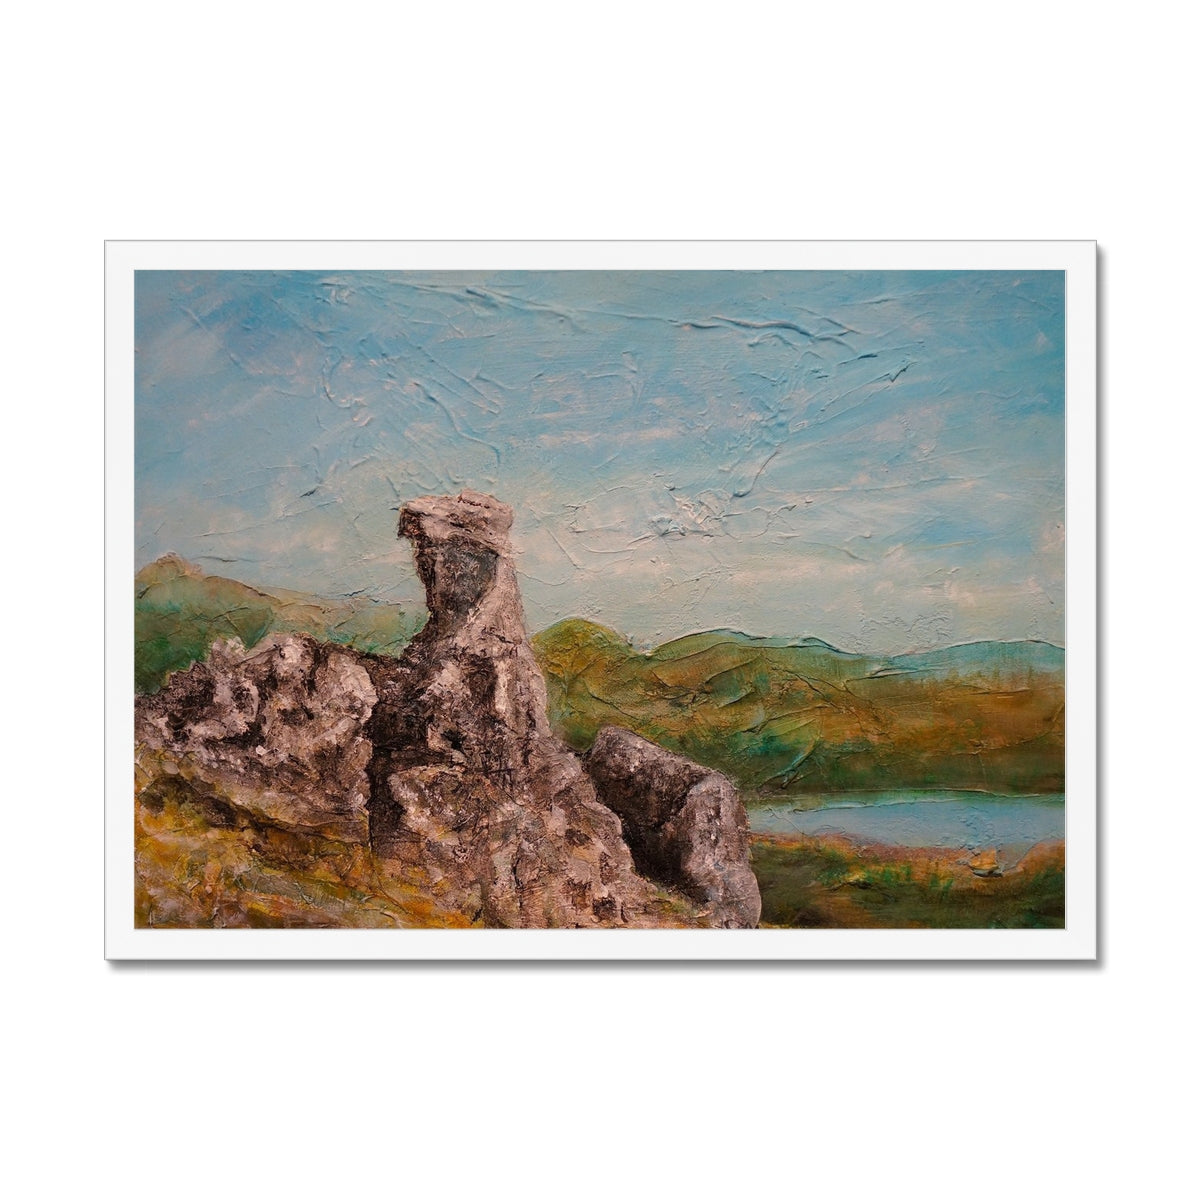 The Cobbler ii Painting | Framed Prints From Scotland-Framed Prints-Scottish Lochs & Mountains Art Gallery-A2 Landscape-White Frame-Paintings, Prints, Homeware, Art Gifts From Scotland By Scottish Artist Kevin Hunter